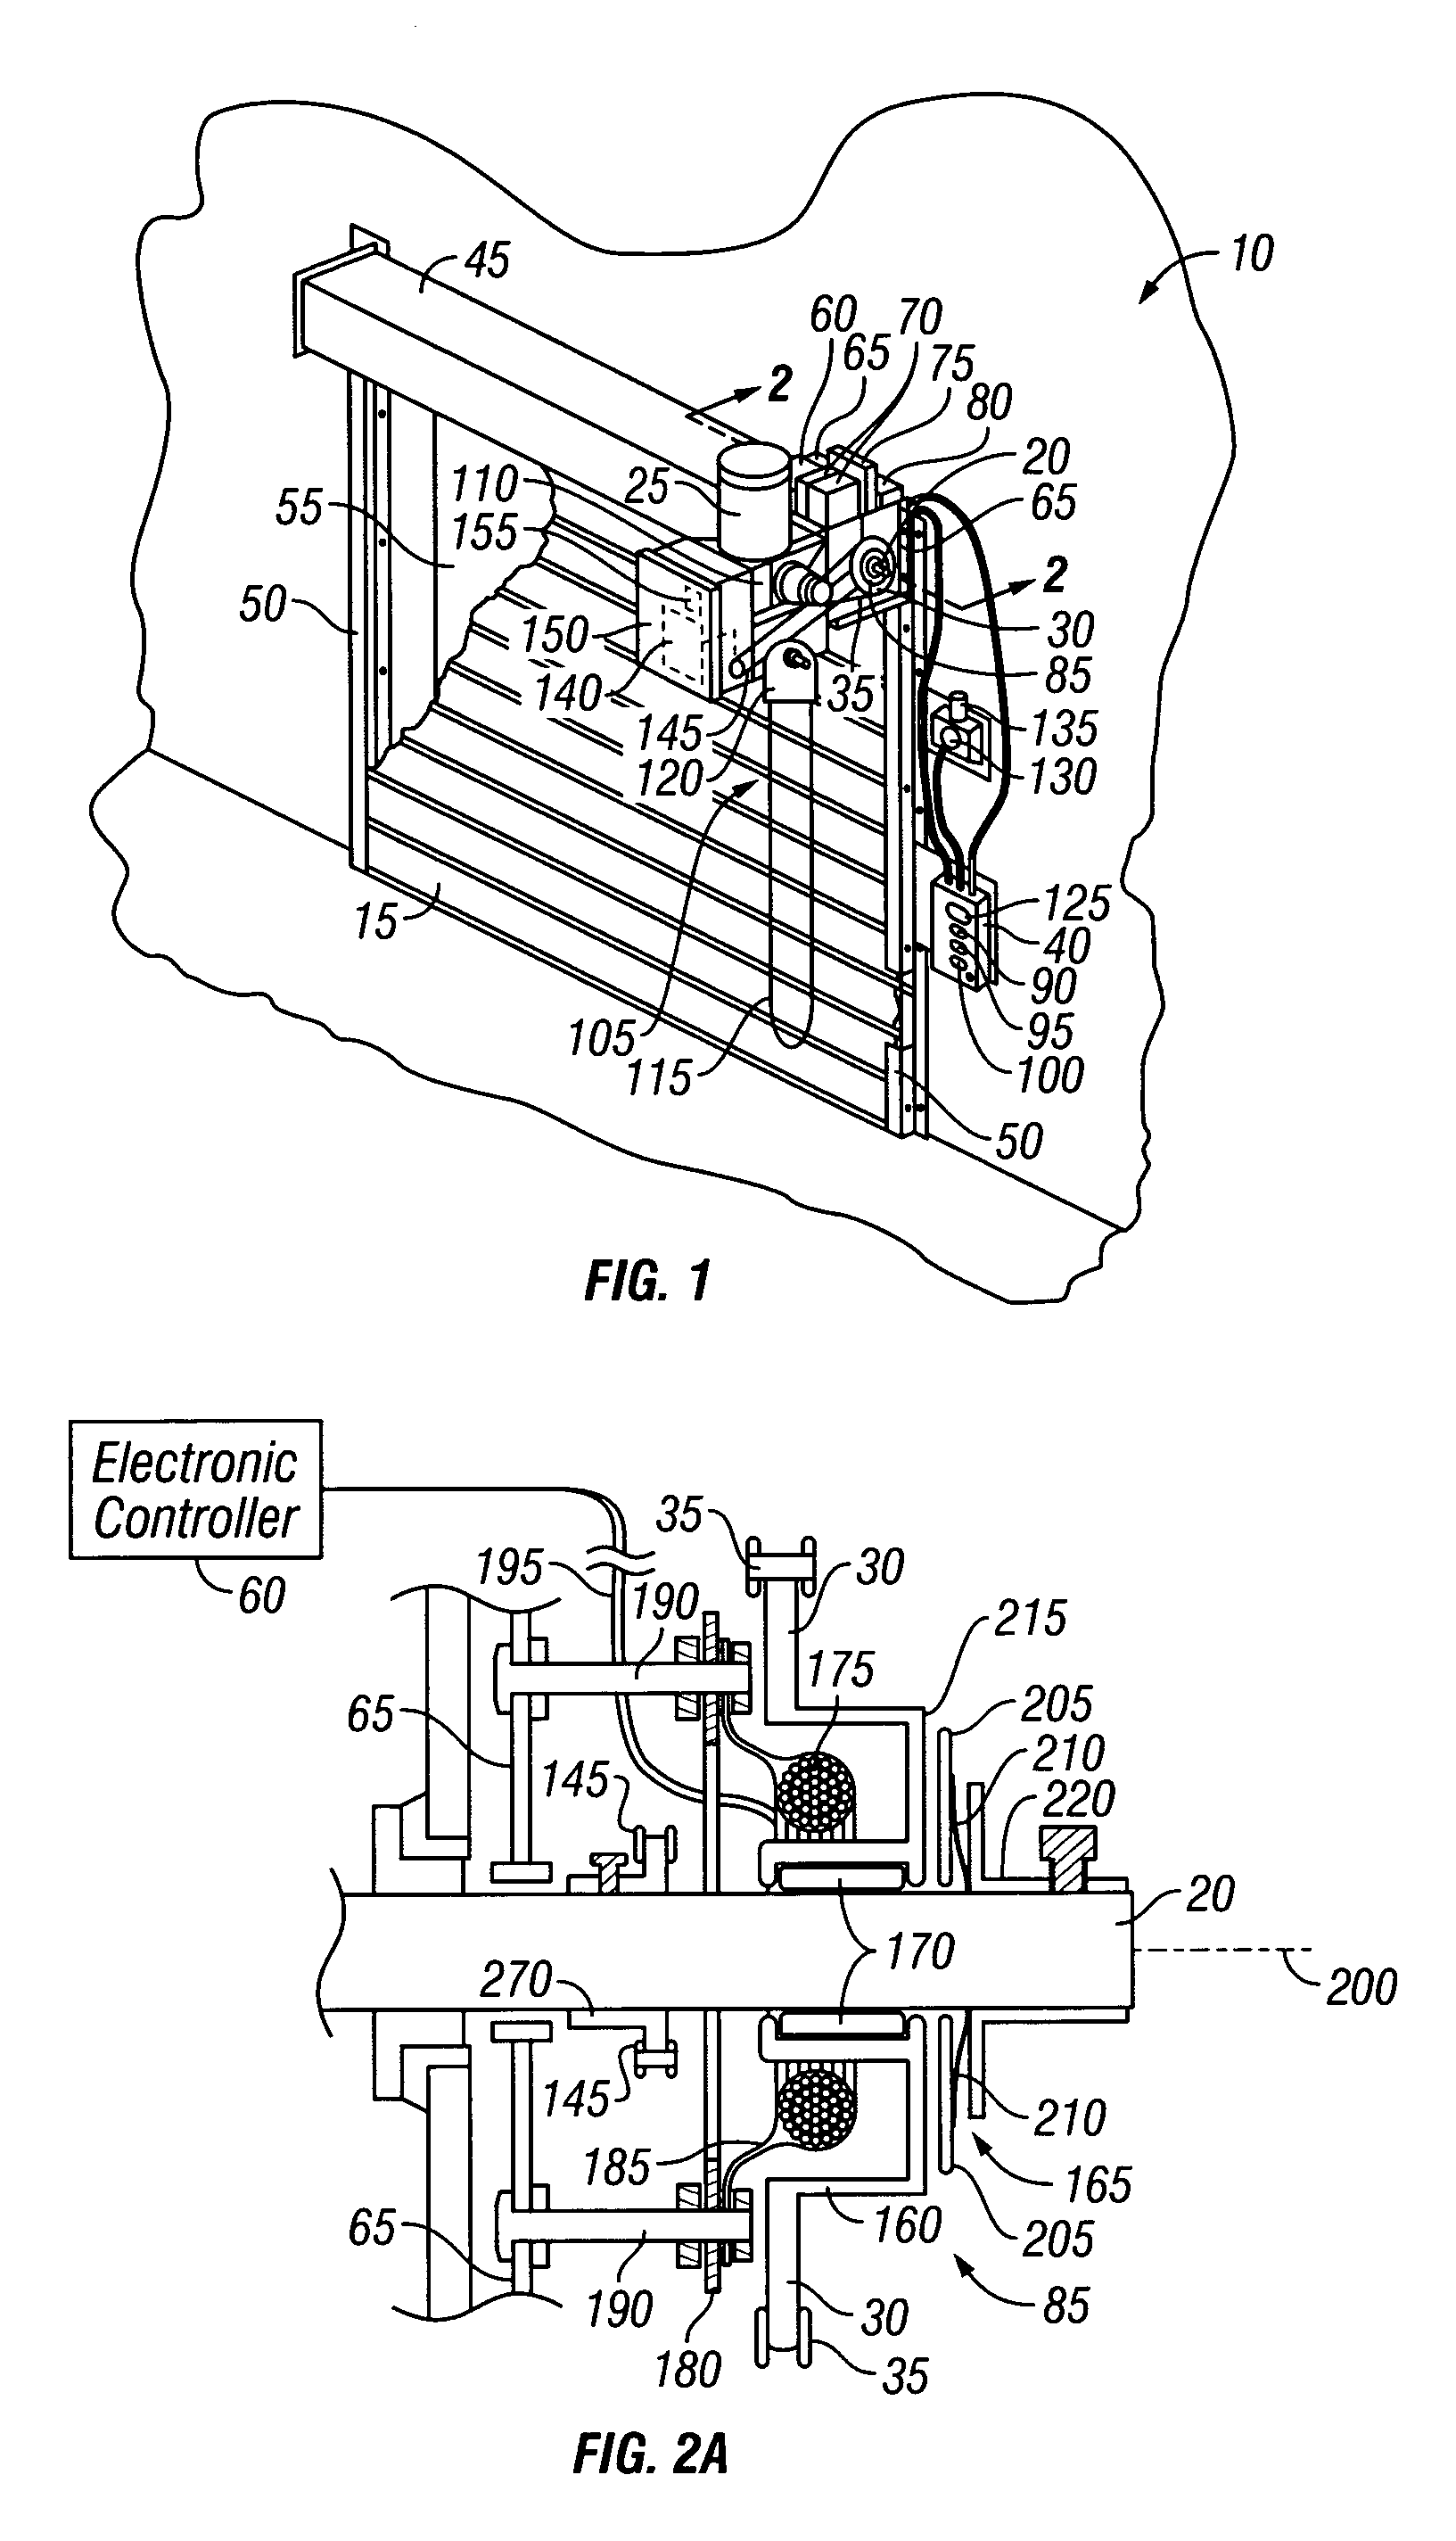 Fire door control system and method including periodic system testing